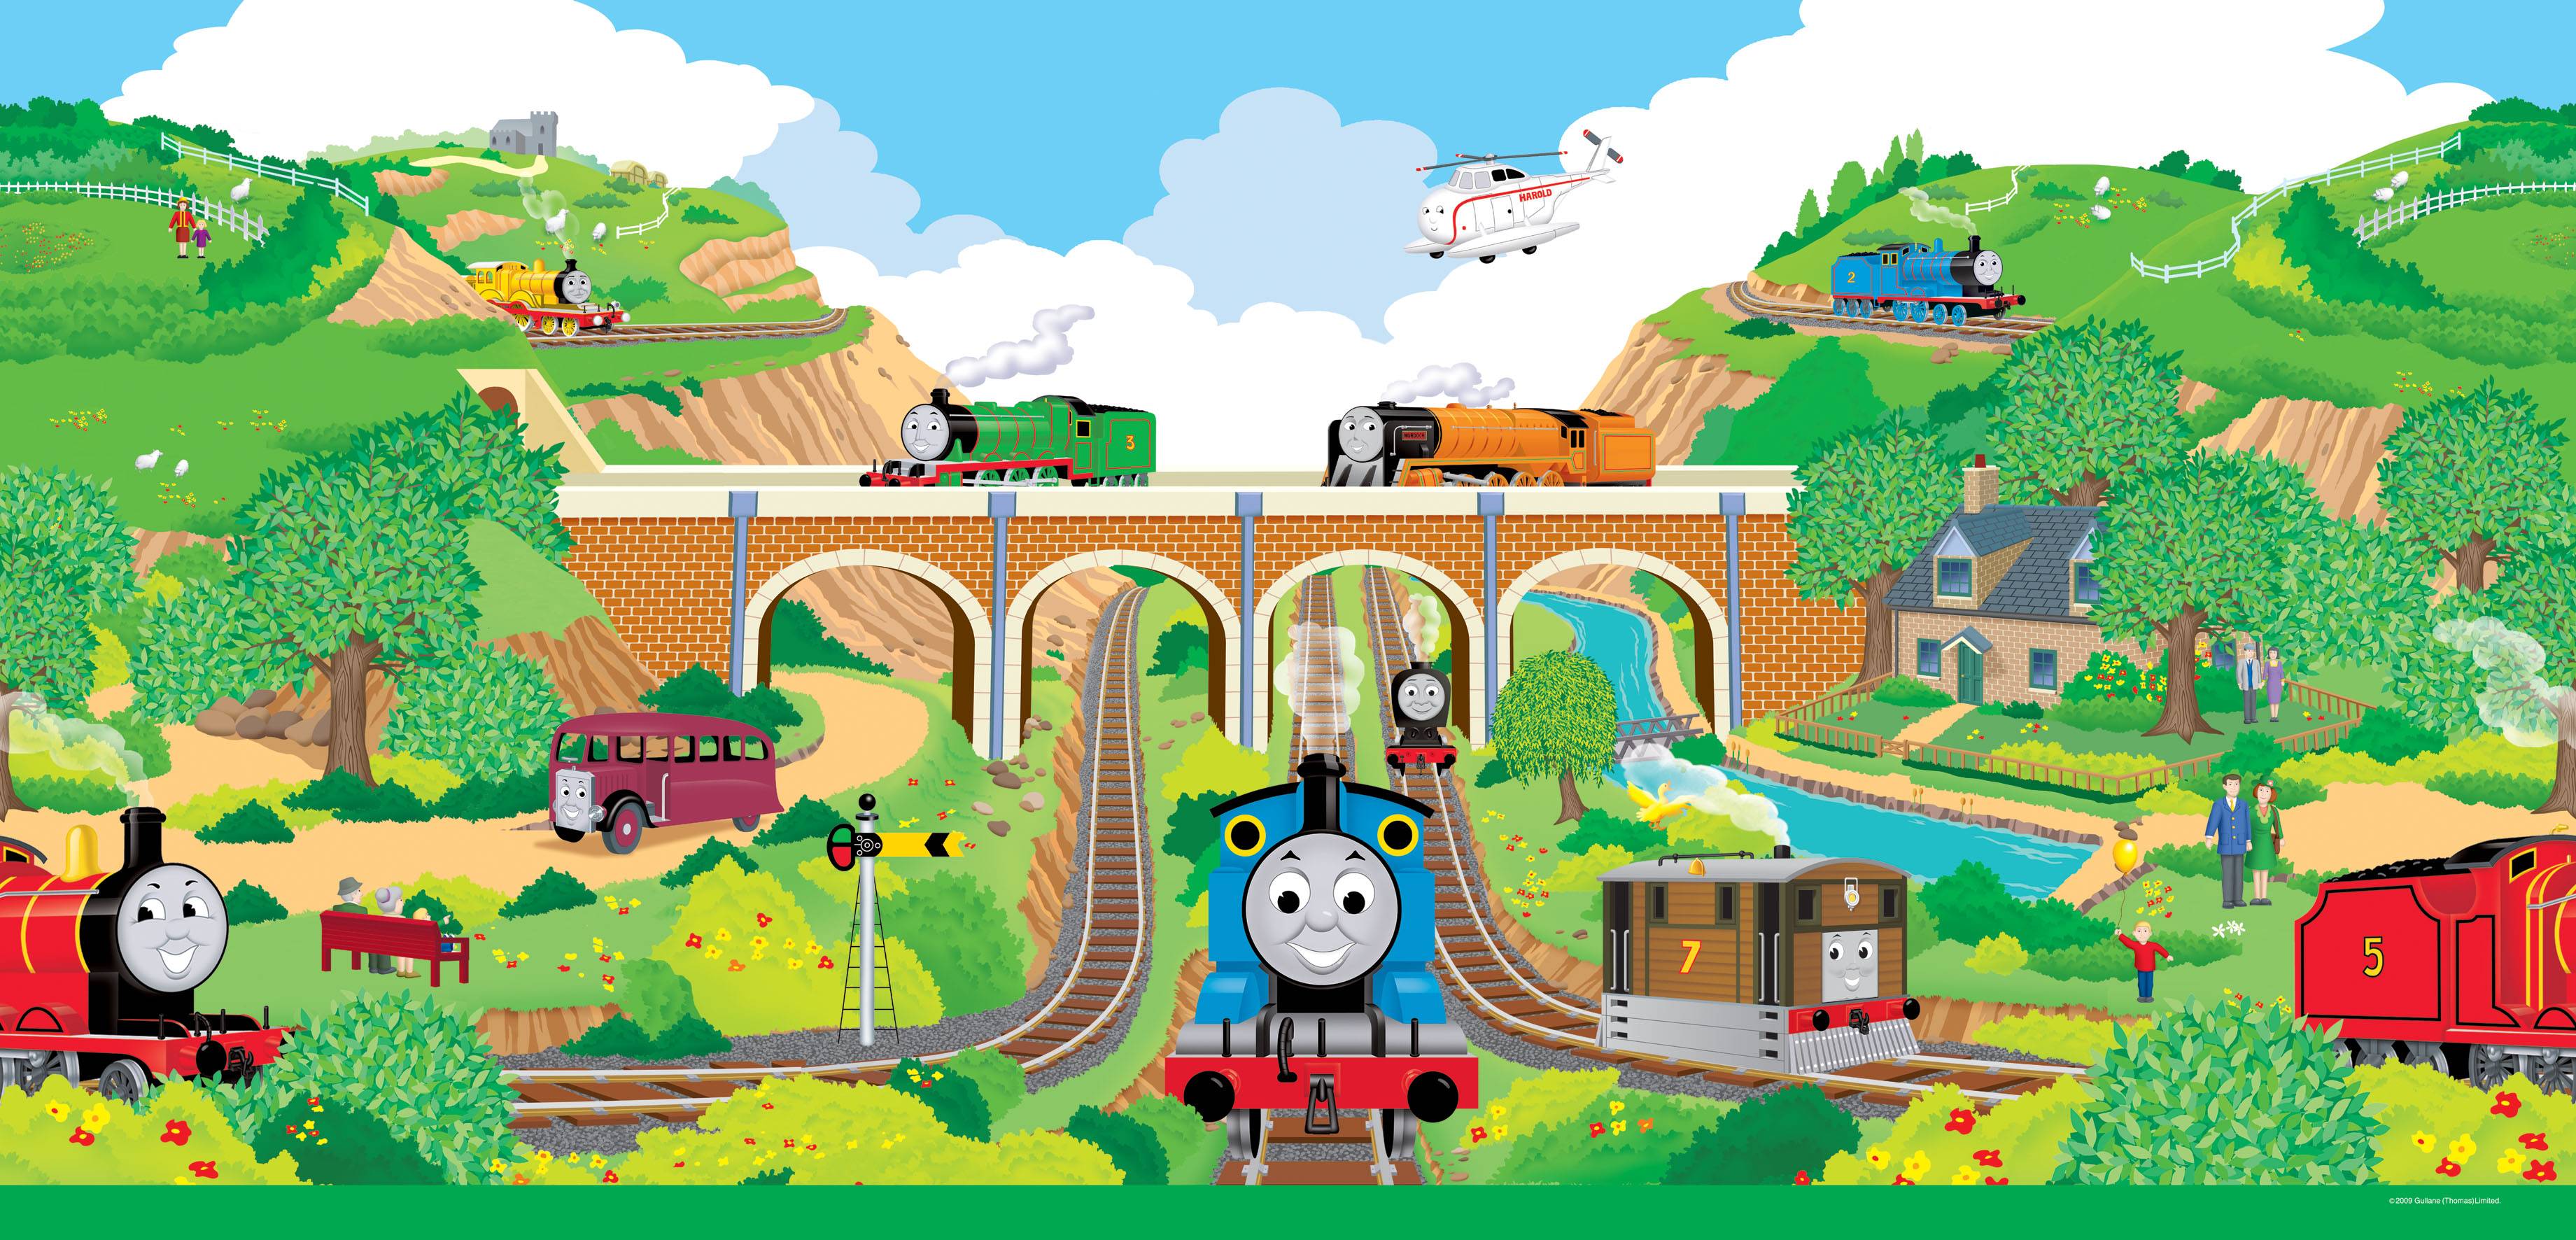 Thomas The Tank Engine Wallpaper   Viewing Gallery